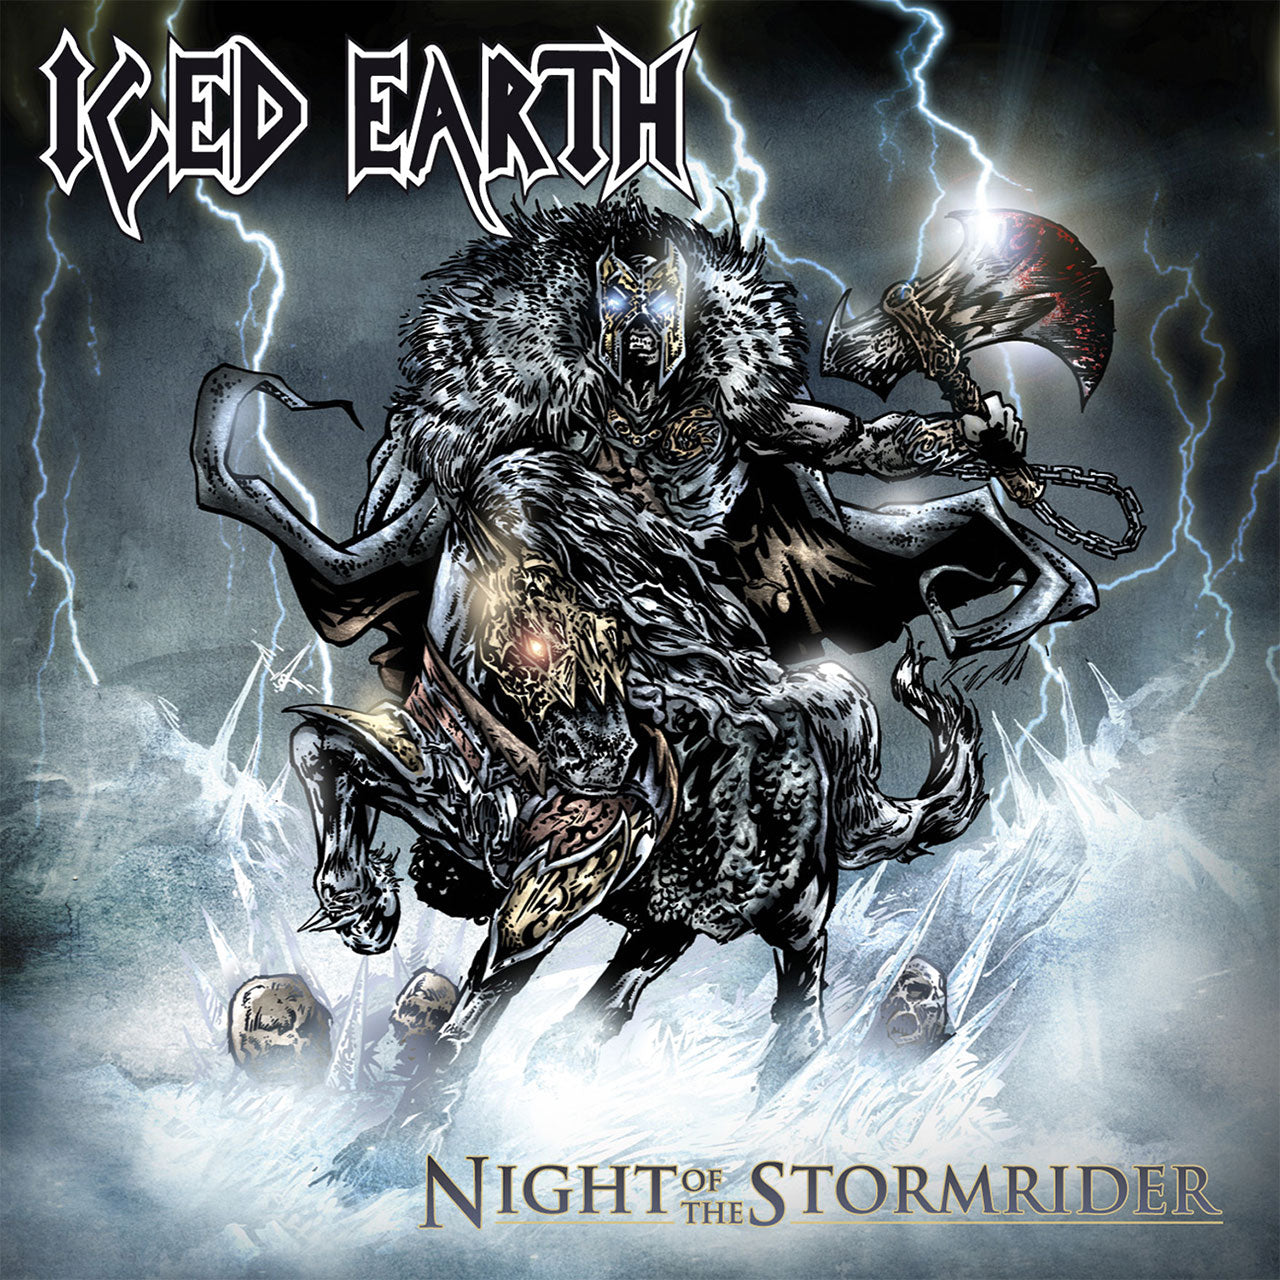 Iced Earth - Night of the Stormrider (2002 Reissue) (CD)